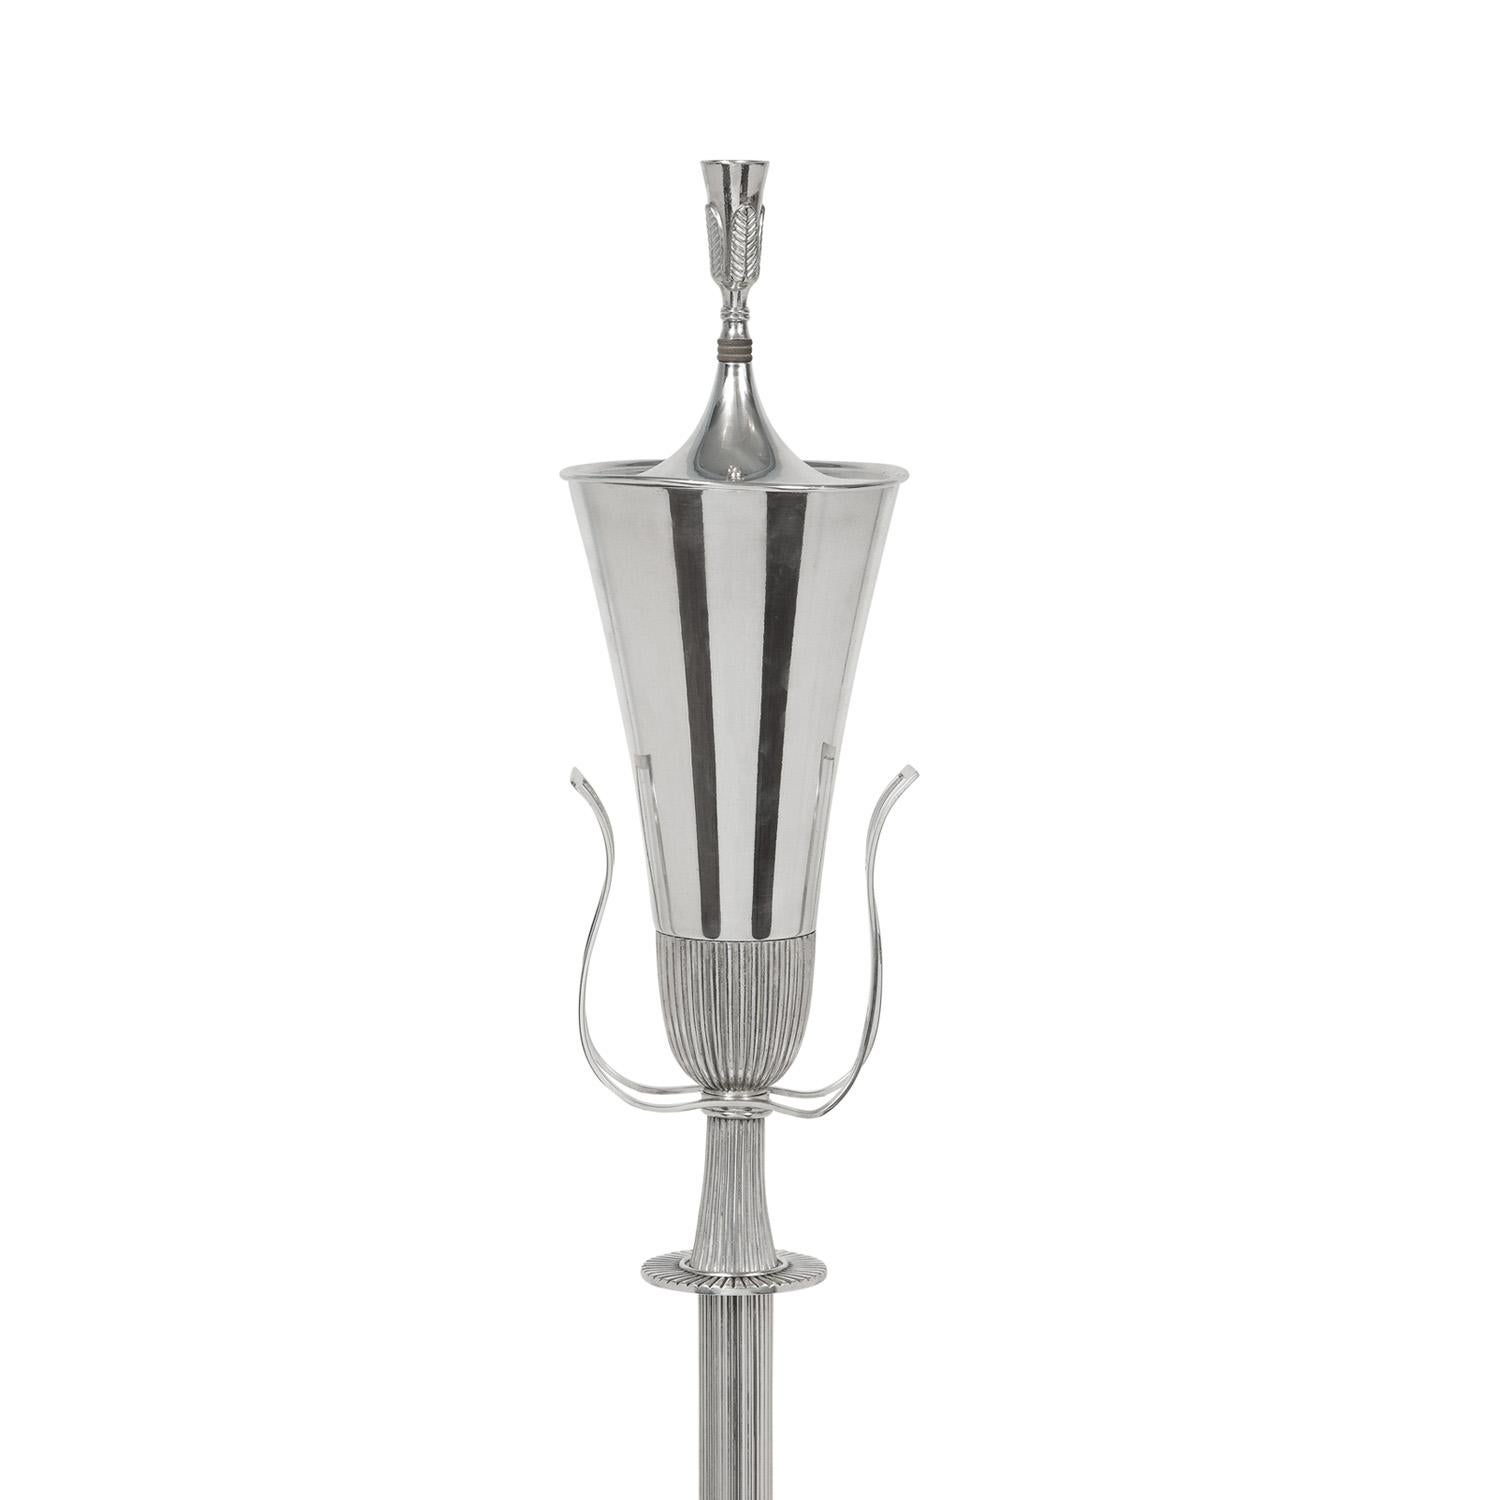 Art Deco Tommi Parzinger Torchere in Polished Nickel, 1950s For Sale